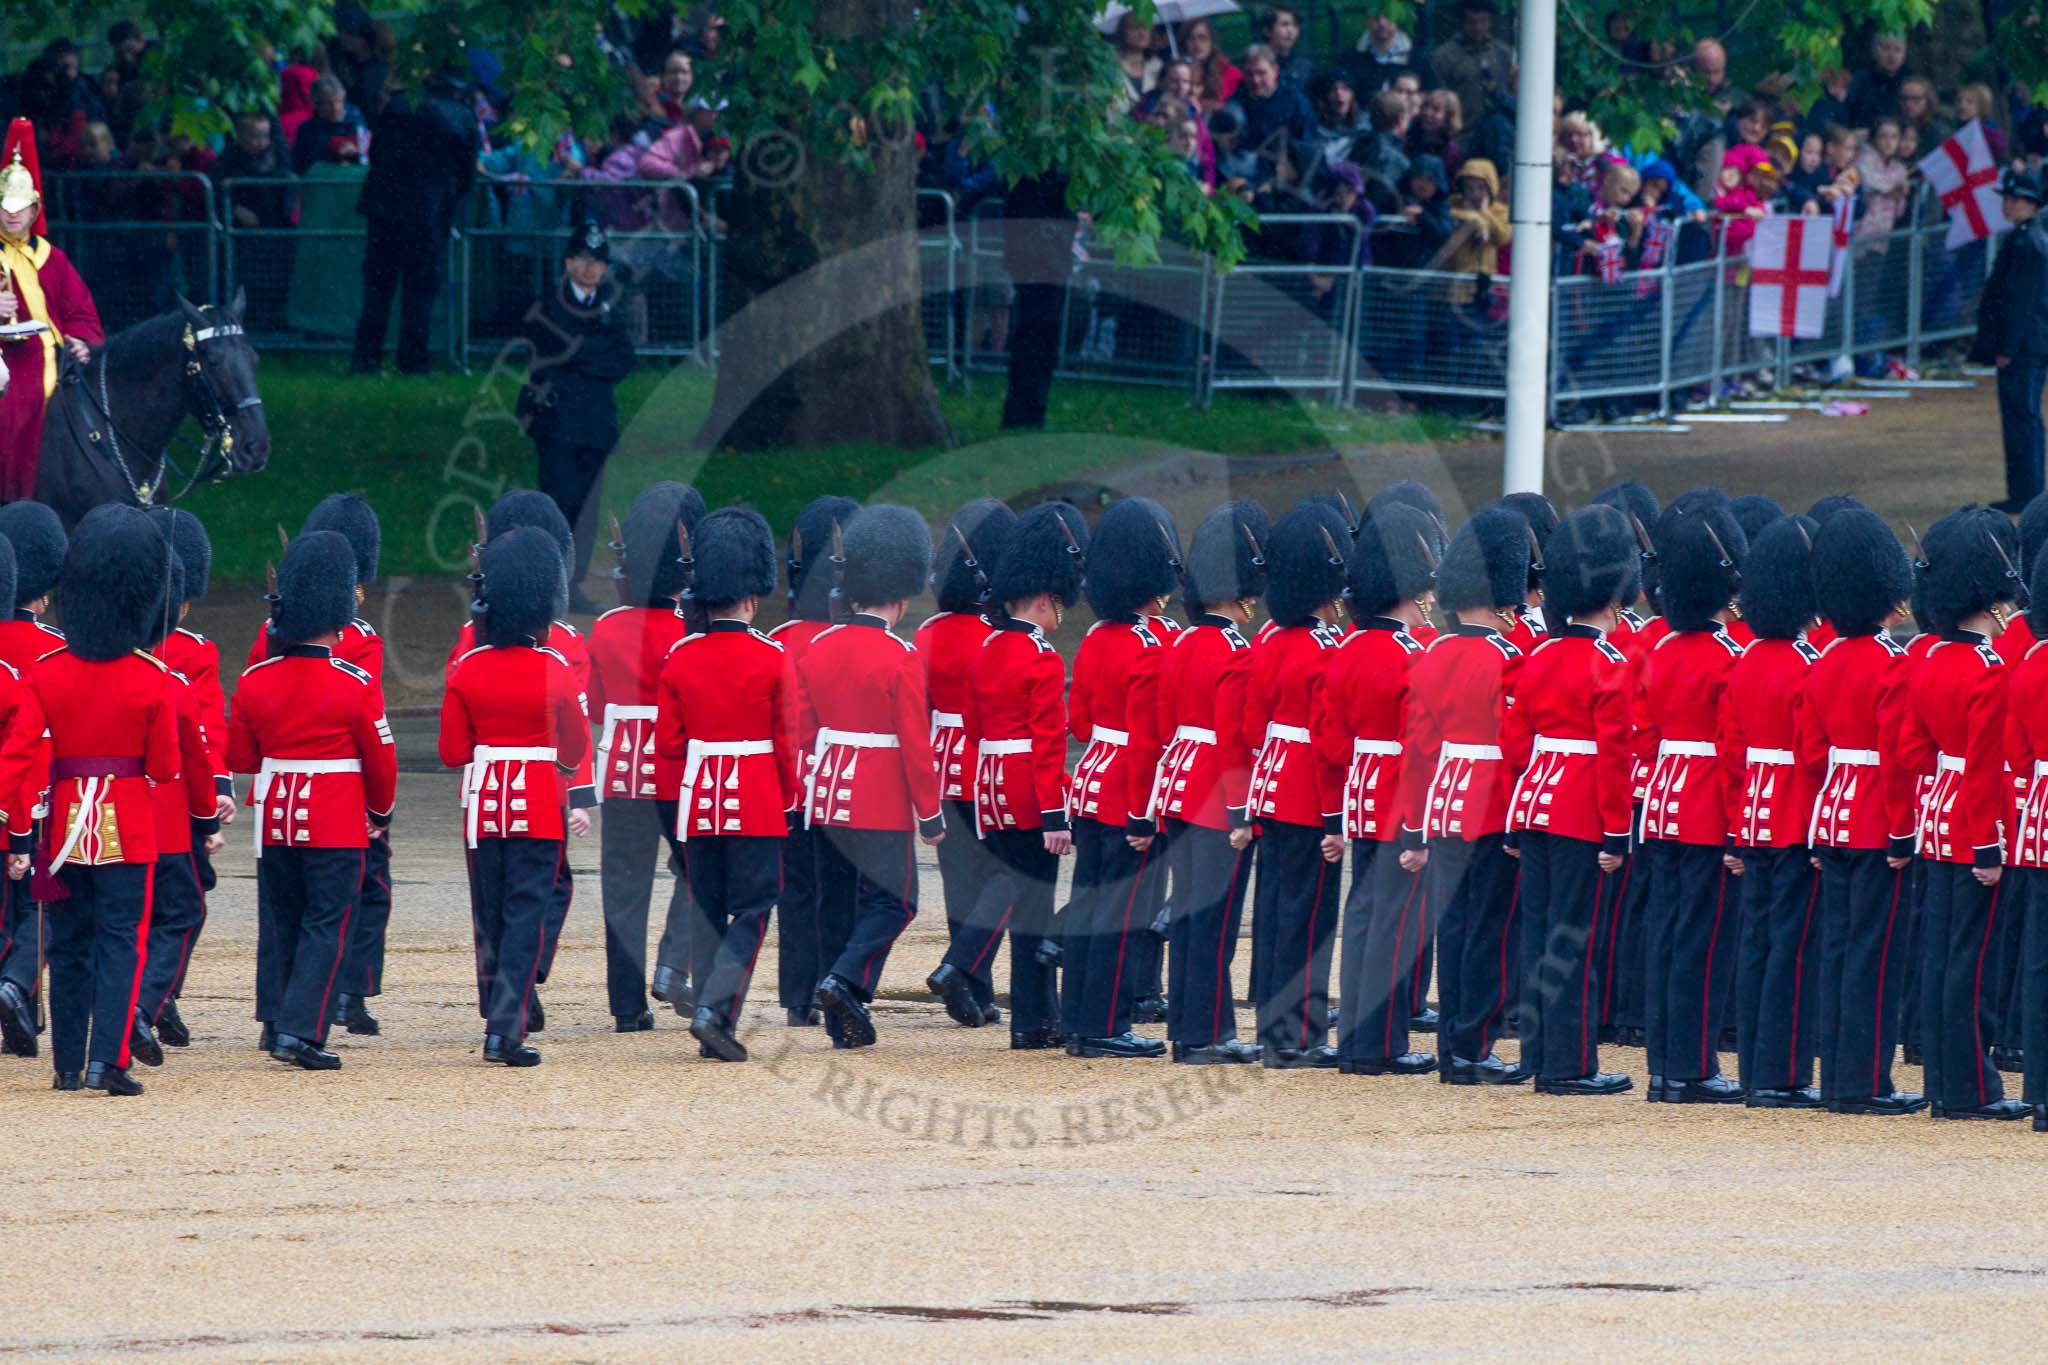 The Colonel's Review 2014.
Horse Guards Parade, Westminster,
London,

United Kingdom,
on 07 June 2014 at 11:28, image #456